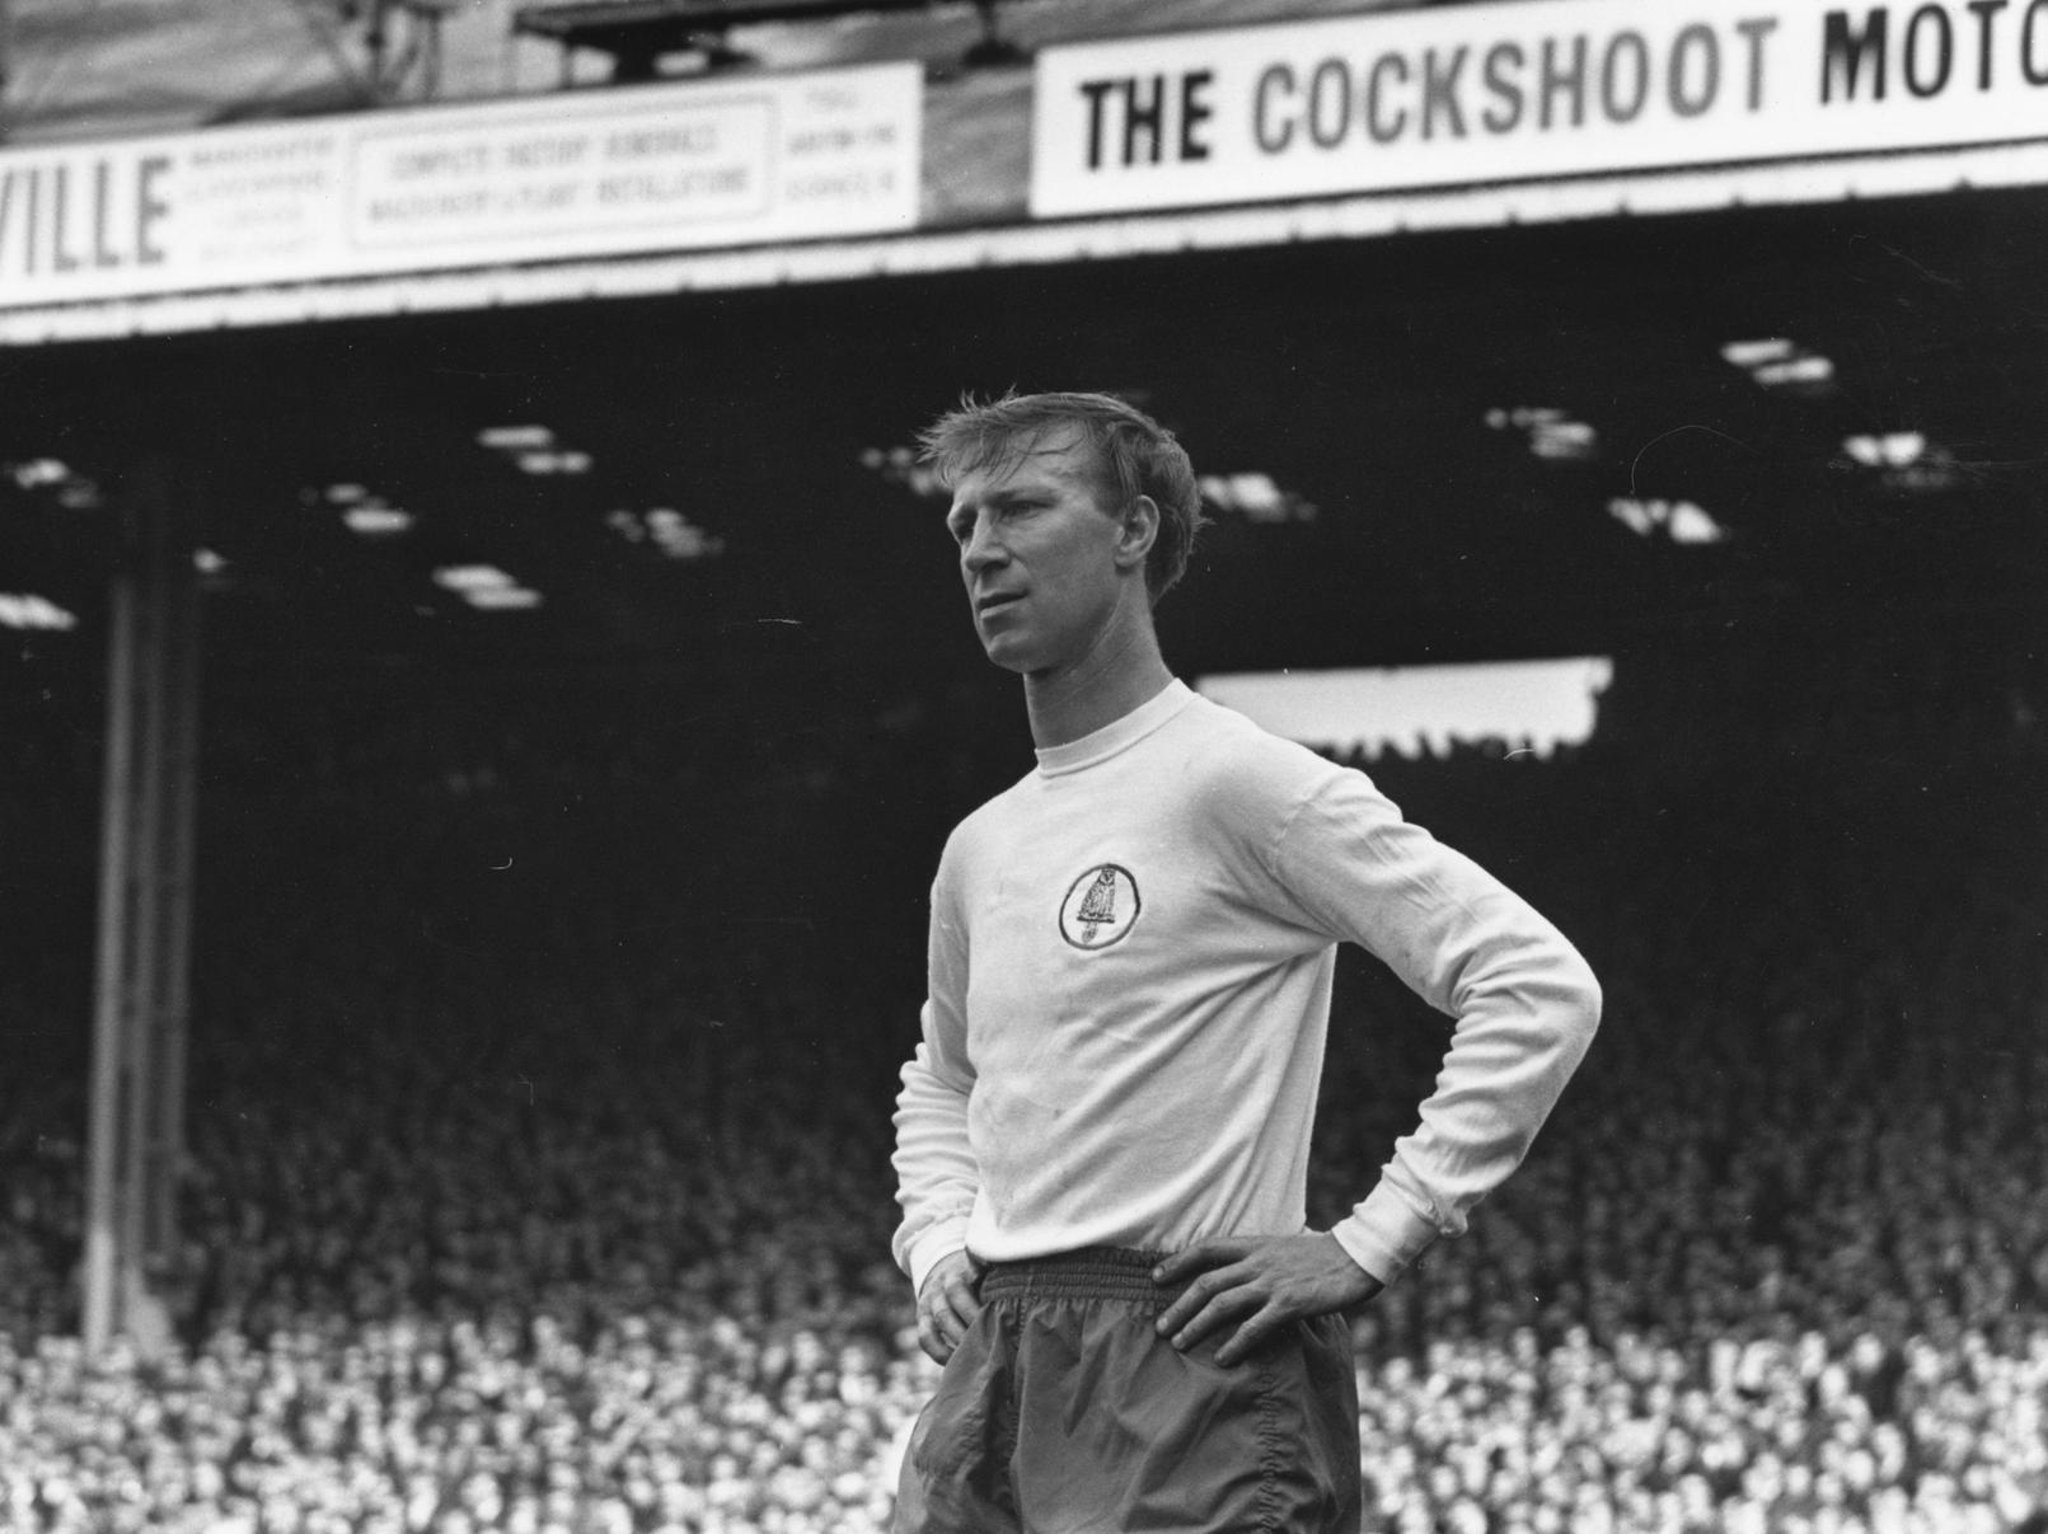 Finding Jack Charlton documentary to premiere on BBC - how ...